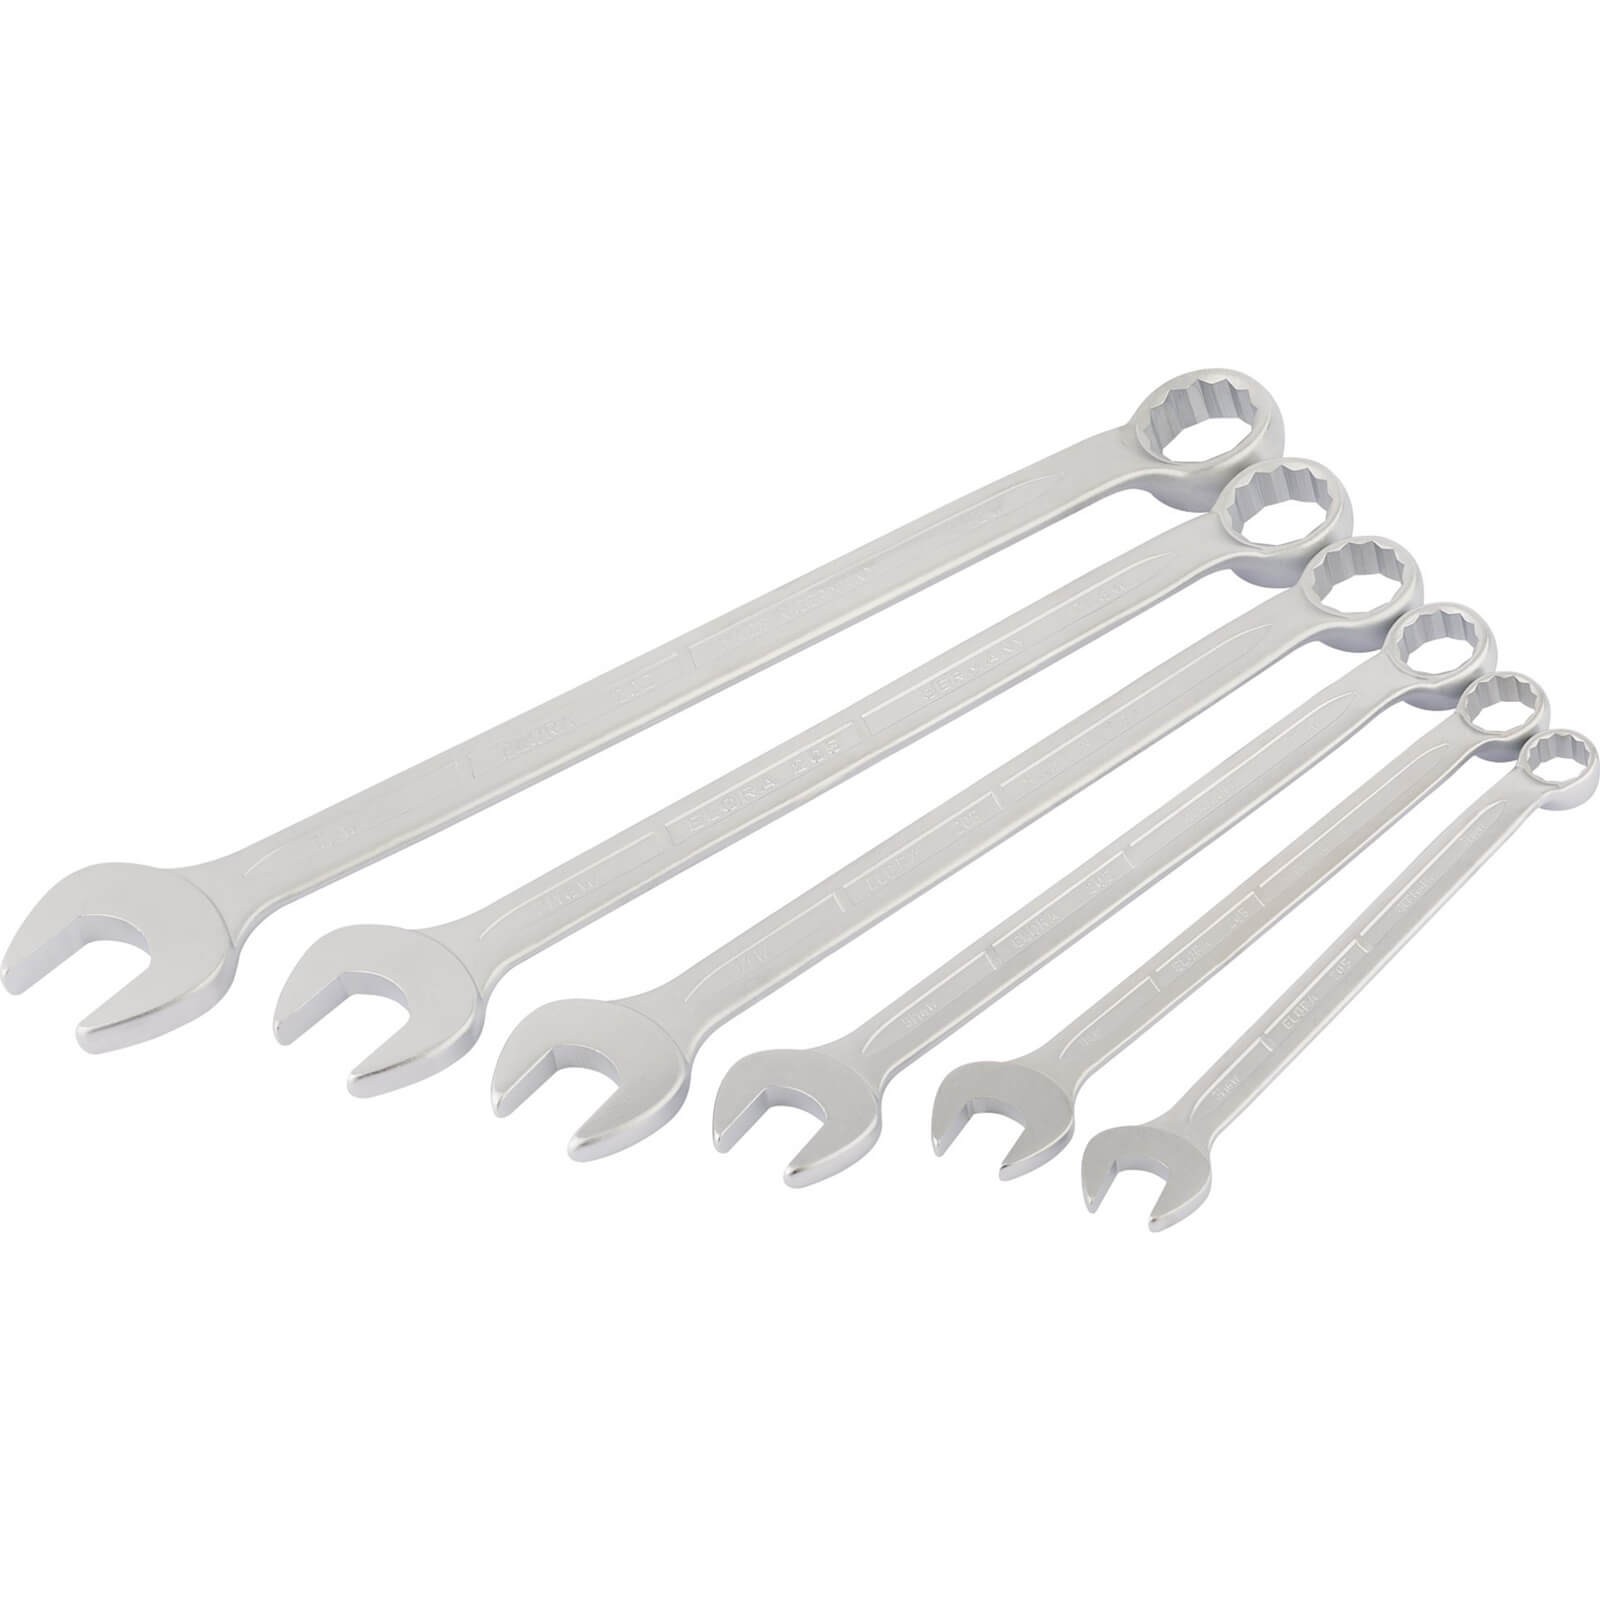 Image of Elora 6 Piece Long Combination Spanner Set Whitworth